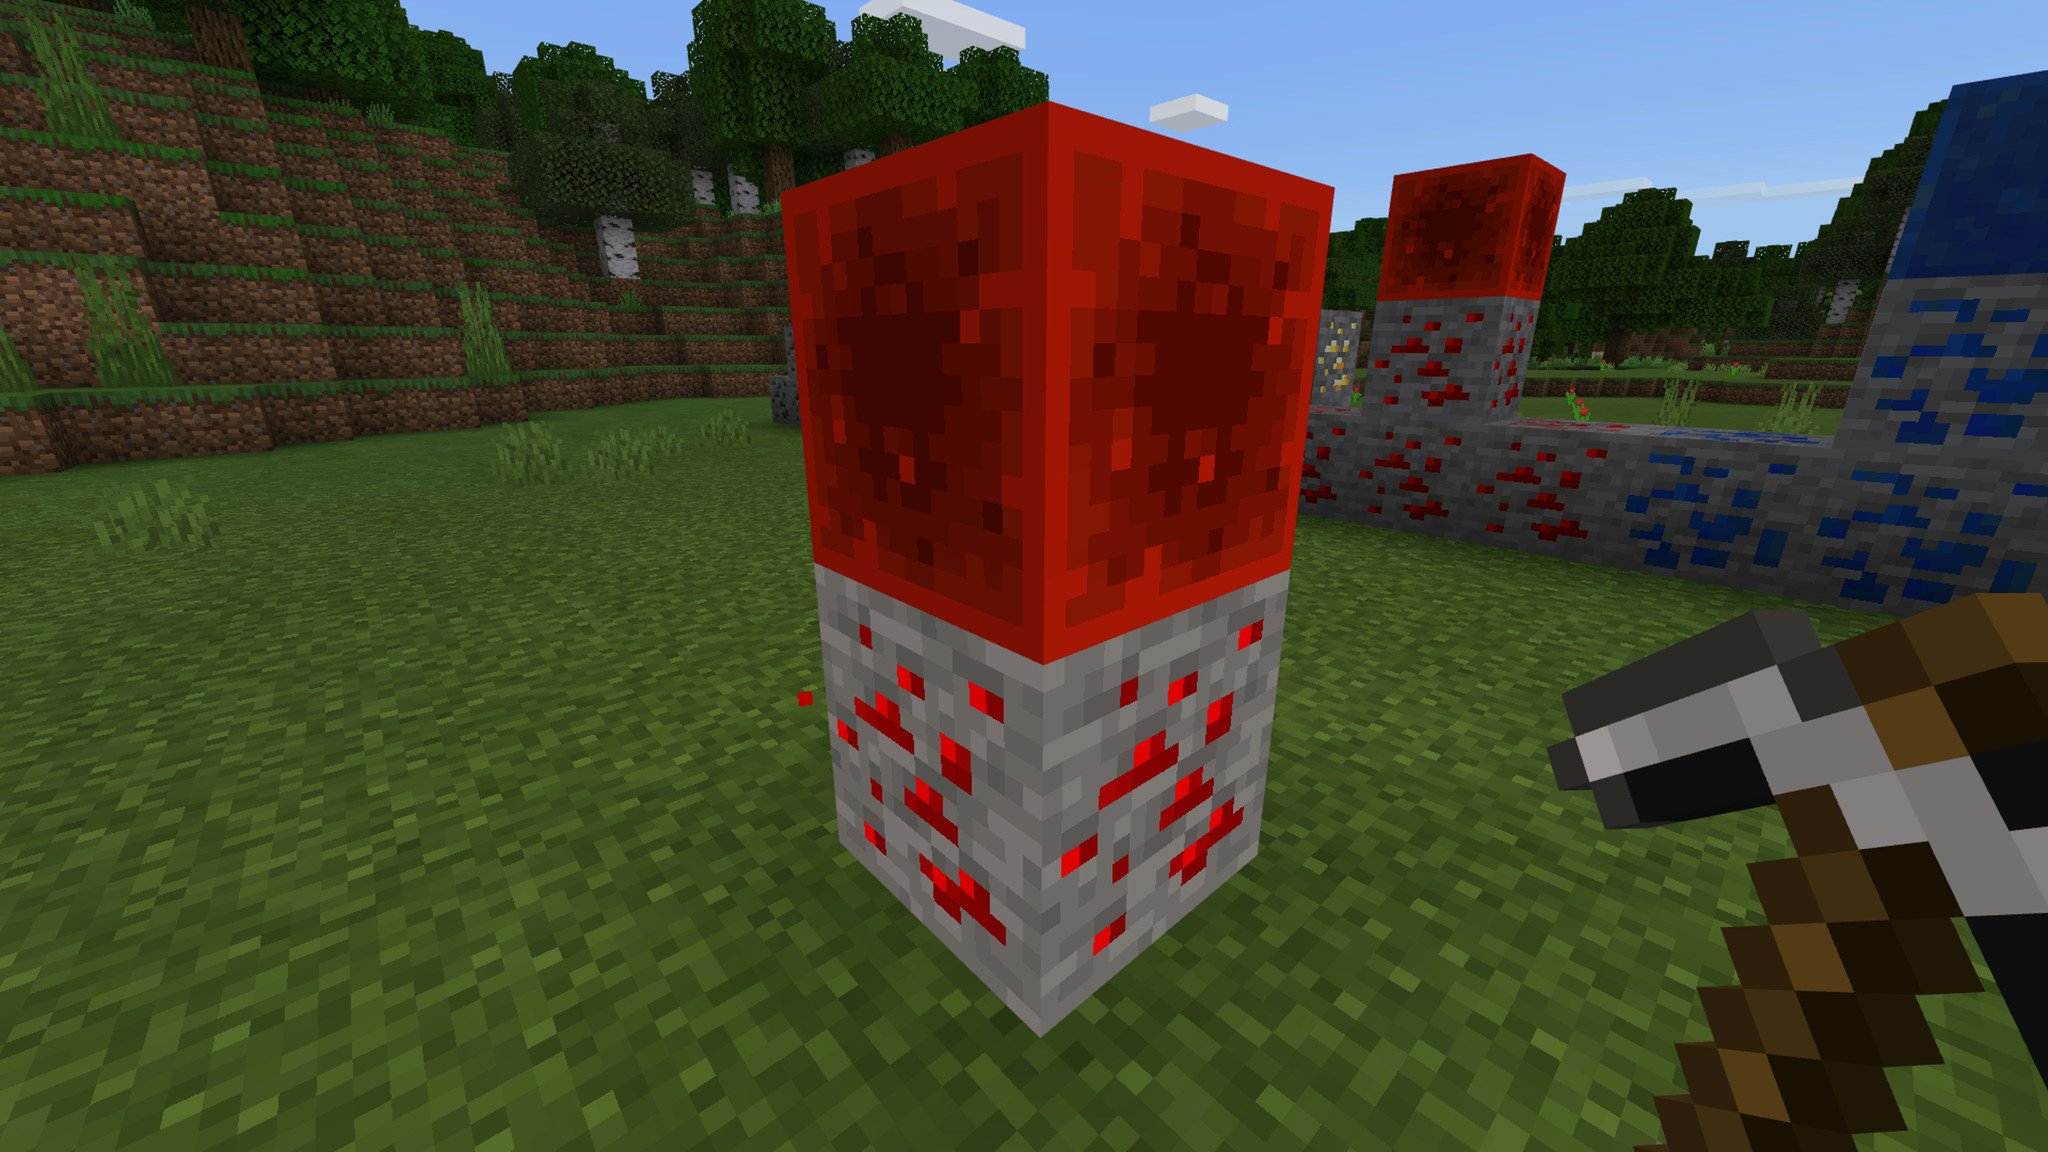 Some redstone ore and a redstone block